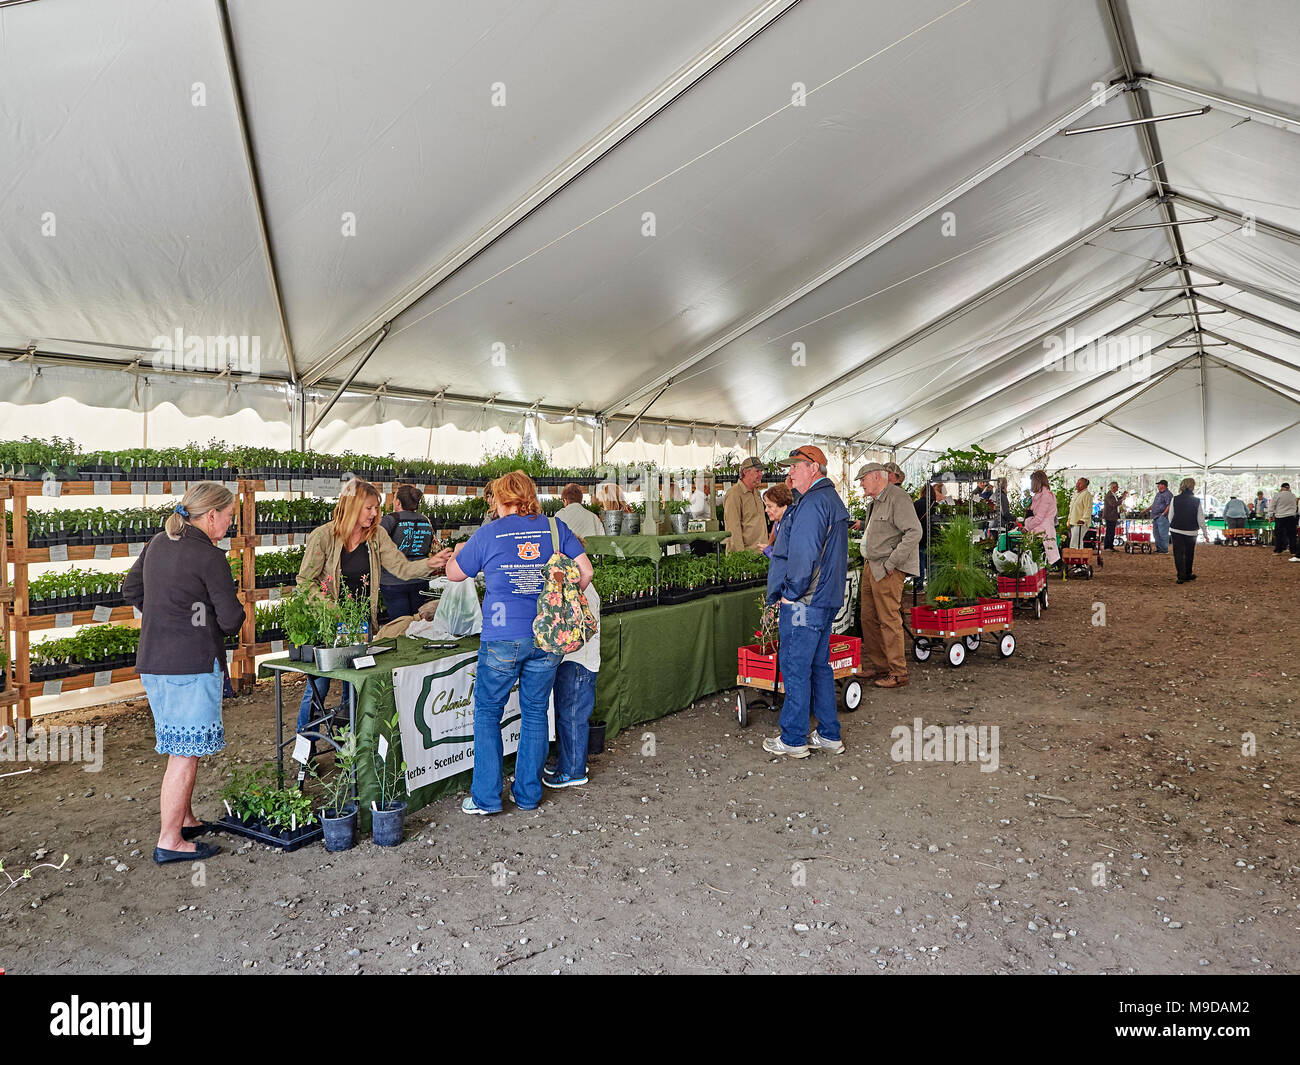 People shopping for garden plants in a large tent at the Spring plant sale in Callaway Gardens, Pine Mountain Georgia, USA. Stock Photo